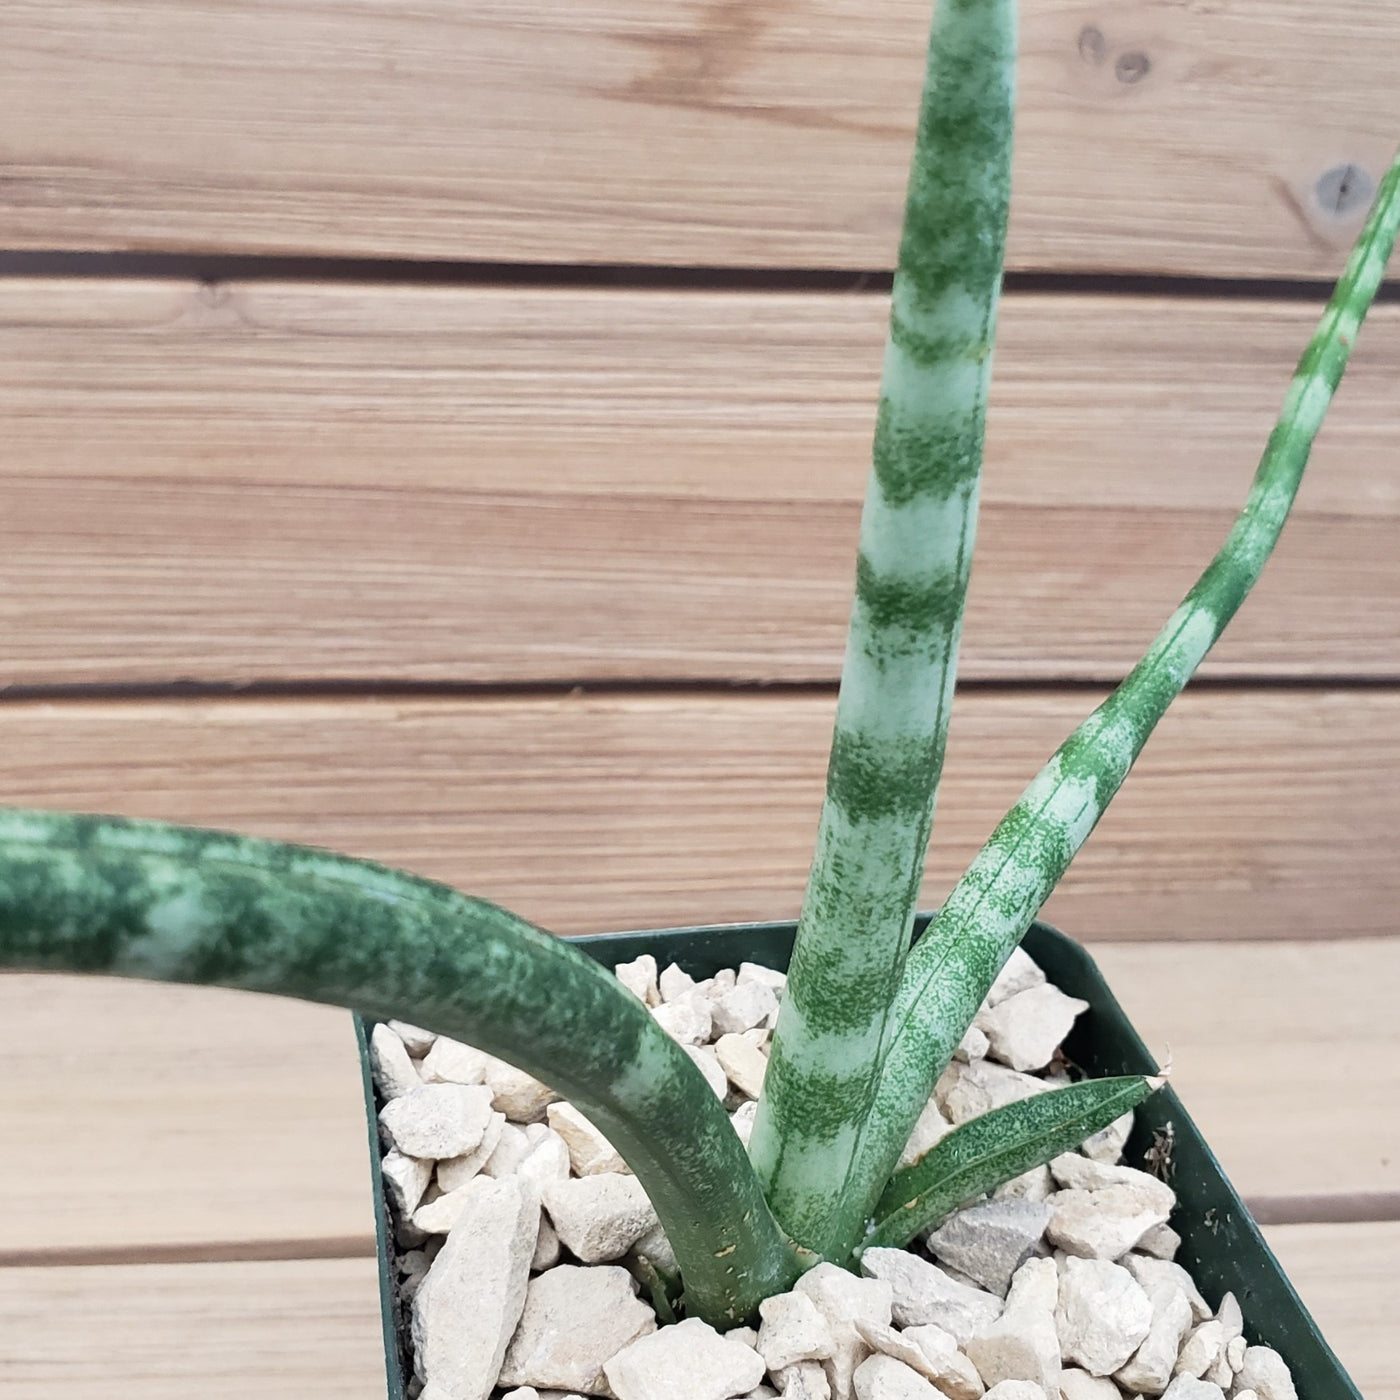 African Spear Plant 'Sansevieria cylindrica' - Cylindrical Snake plant